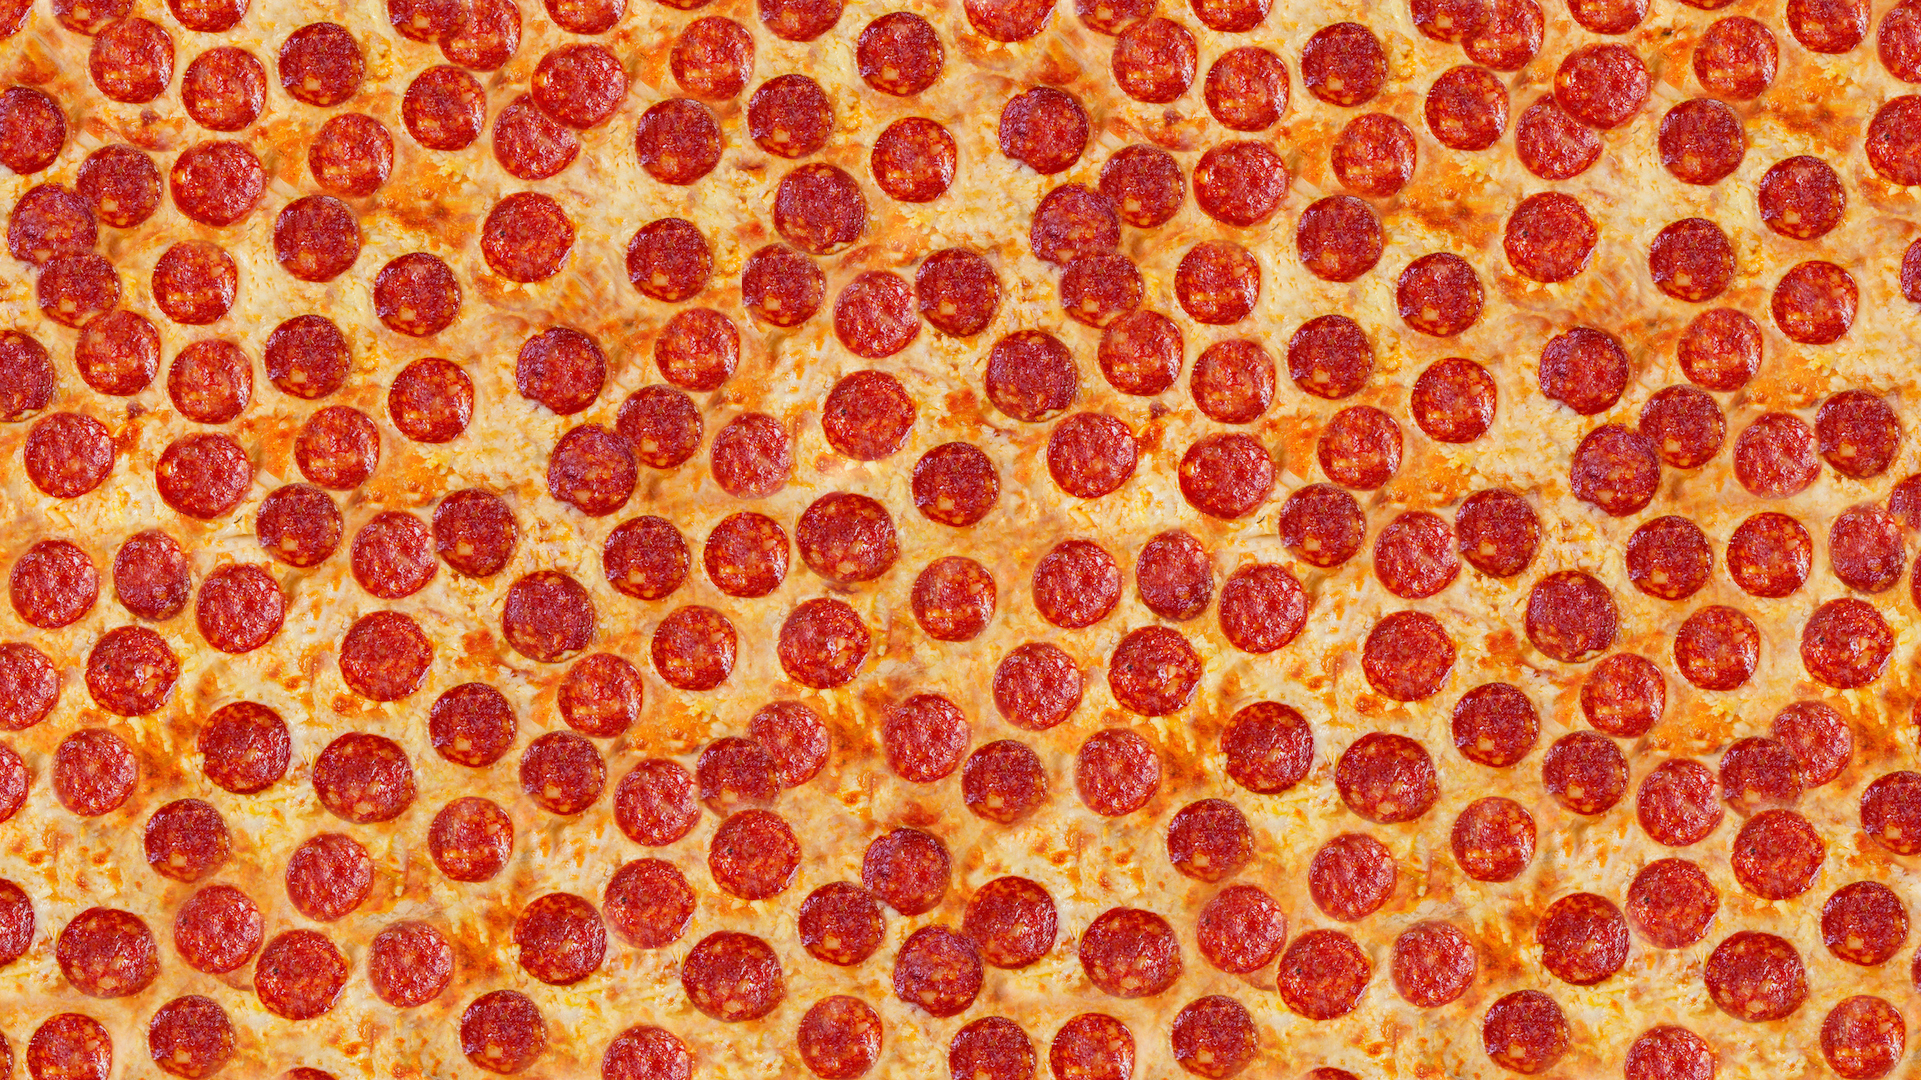 Pepperoni pizza that never seems to end